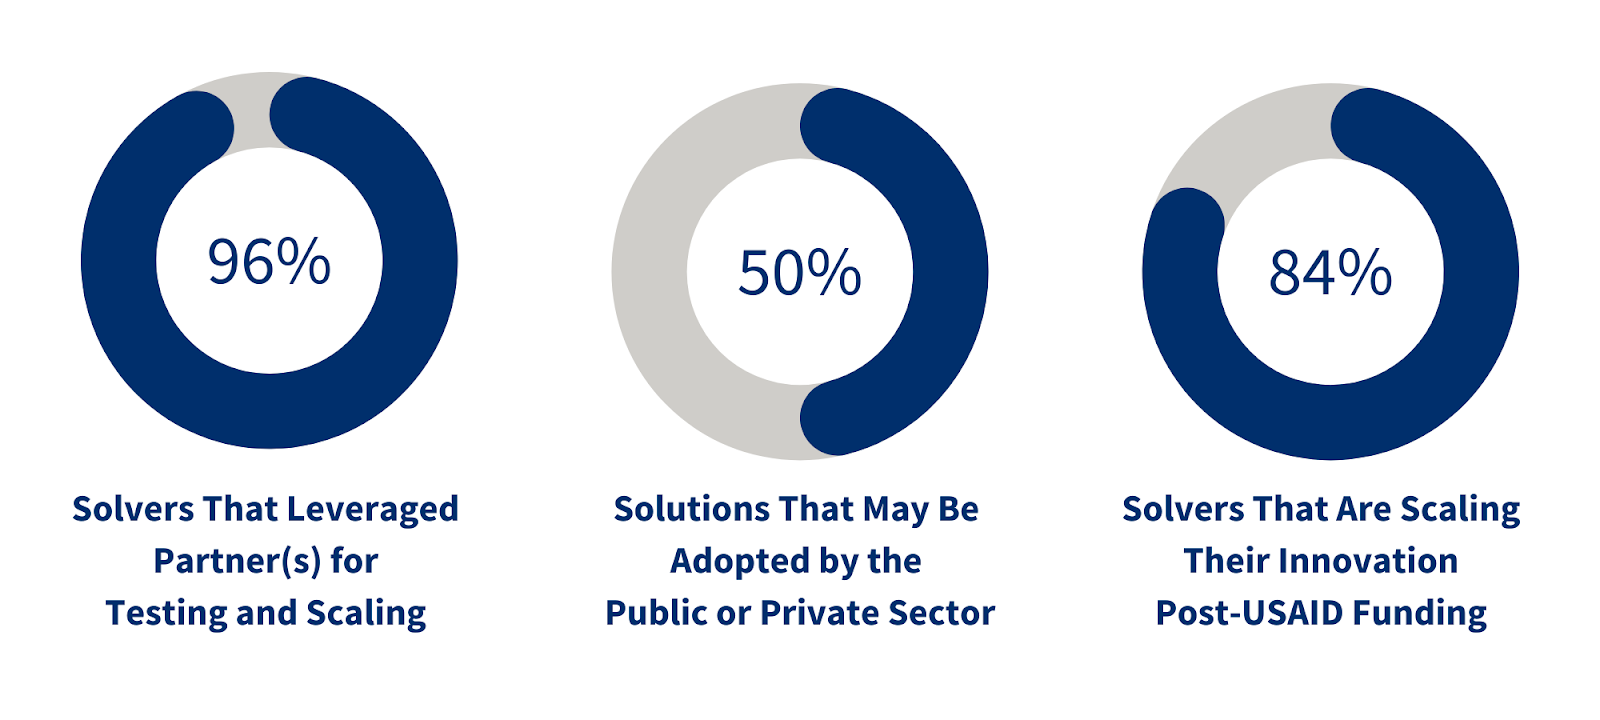 96% solvers that leveraged partner(s) for testing and scaling; 50% solutions that may be adopted by the public or provate sector; 84% solvers that are scaling their innovation post-USAID funding